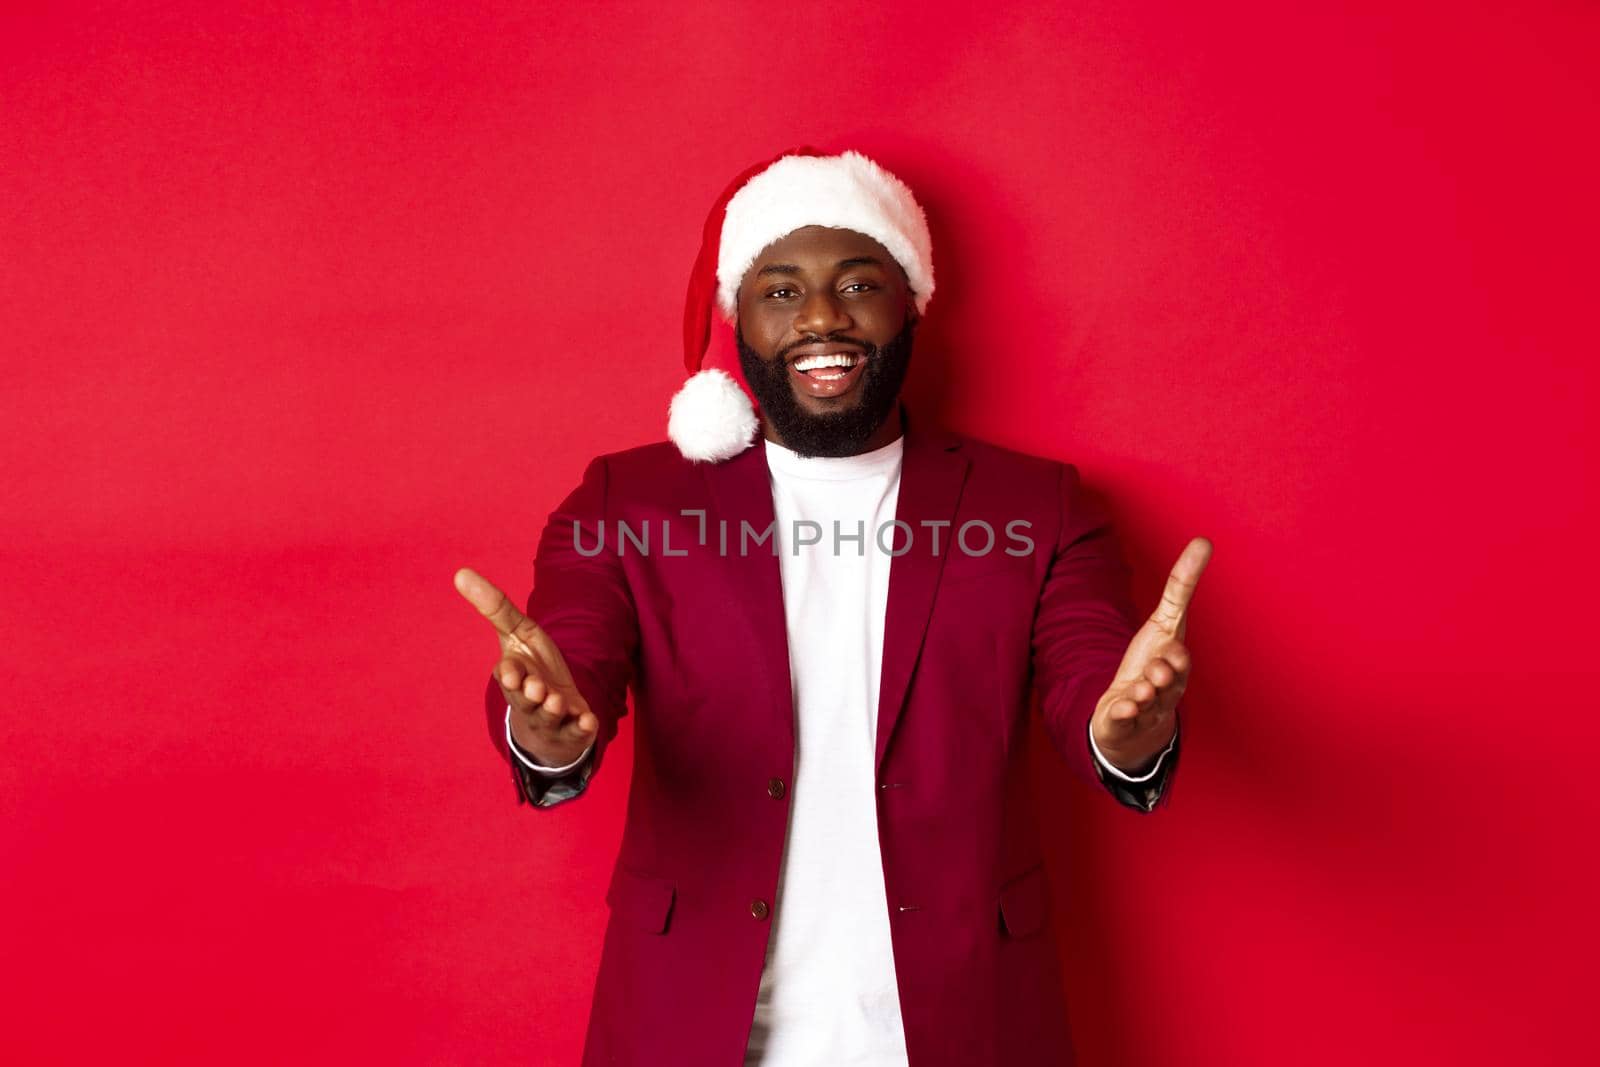 Christmas, party and holidays concept. Happy Black man in santa hat welcome you, pointing hands at camera with pleased smile, standing against red background.